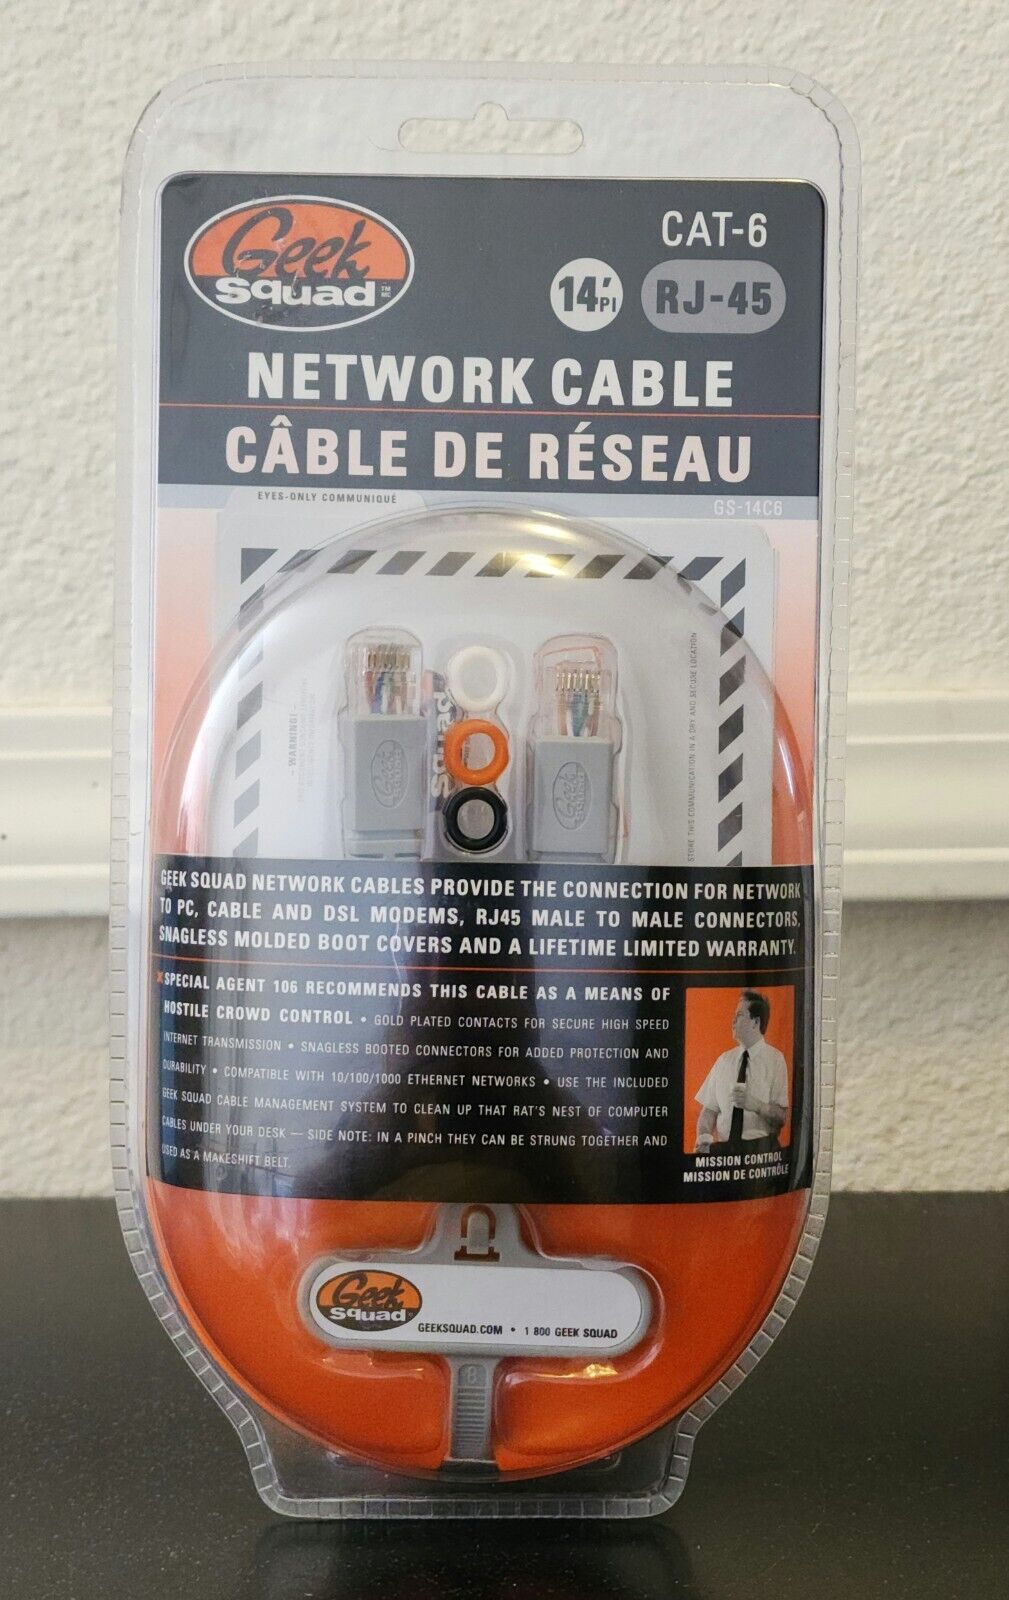 Geek Squad RJ-45 CAT-6 GS-14C6 14' Network Cable in Package